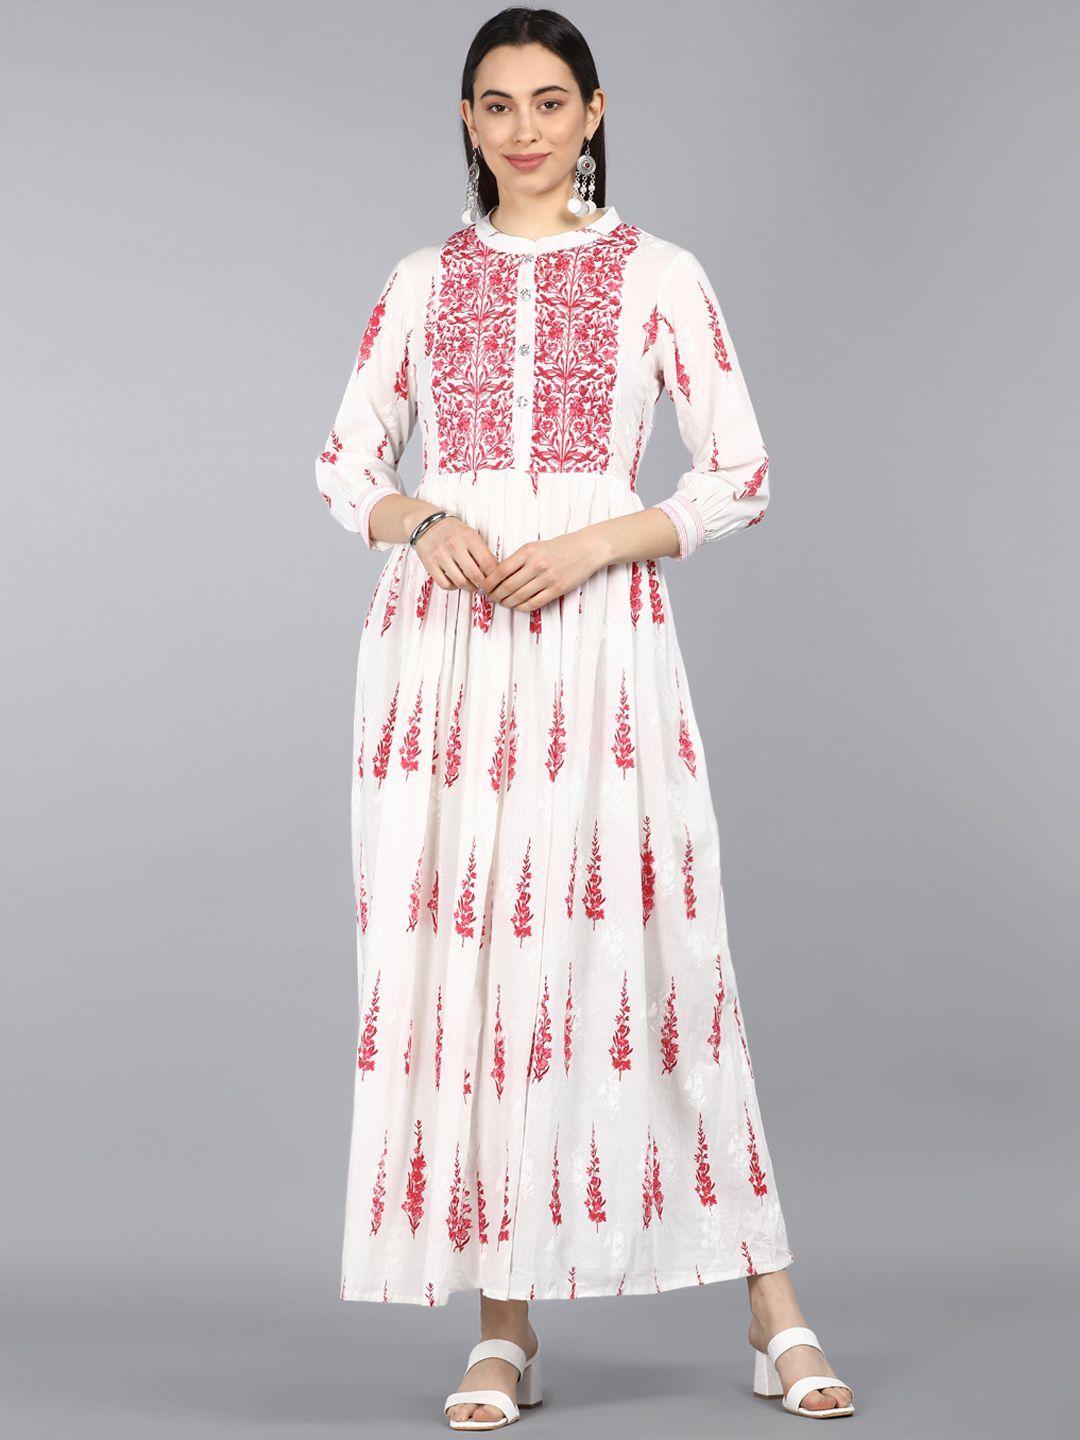 ahika-white-&-red-floral-ethnic-a-line-cotton-maxi-dress